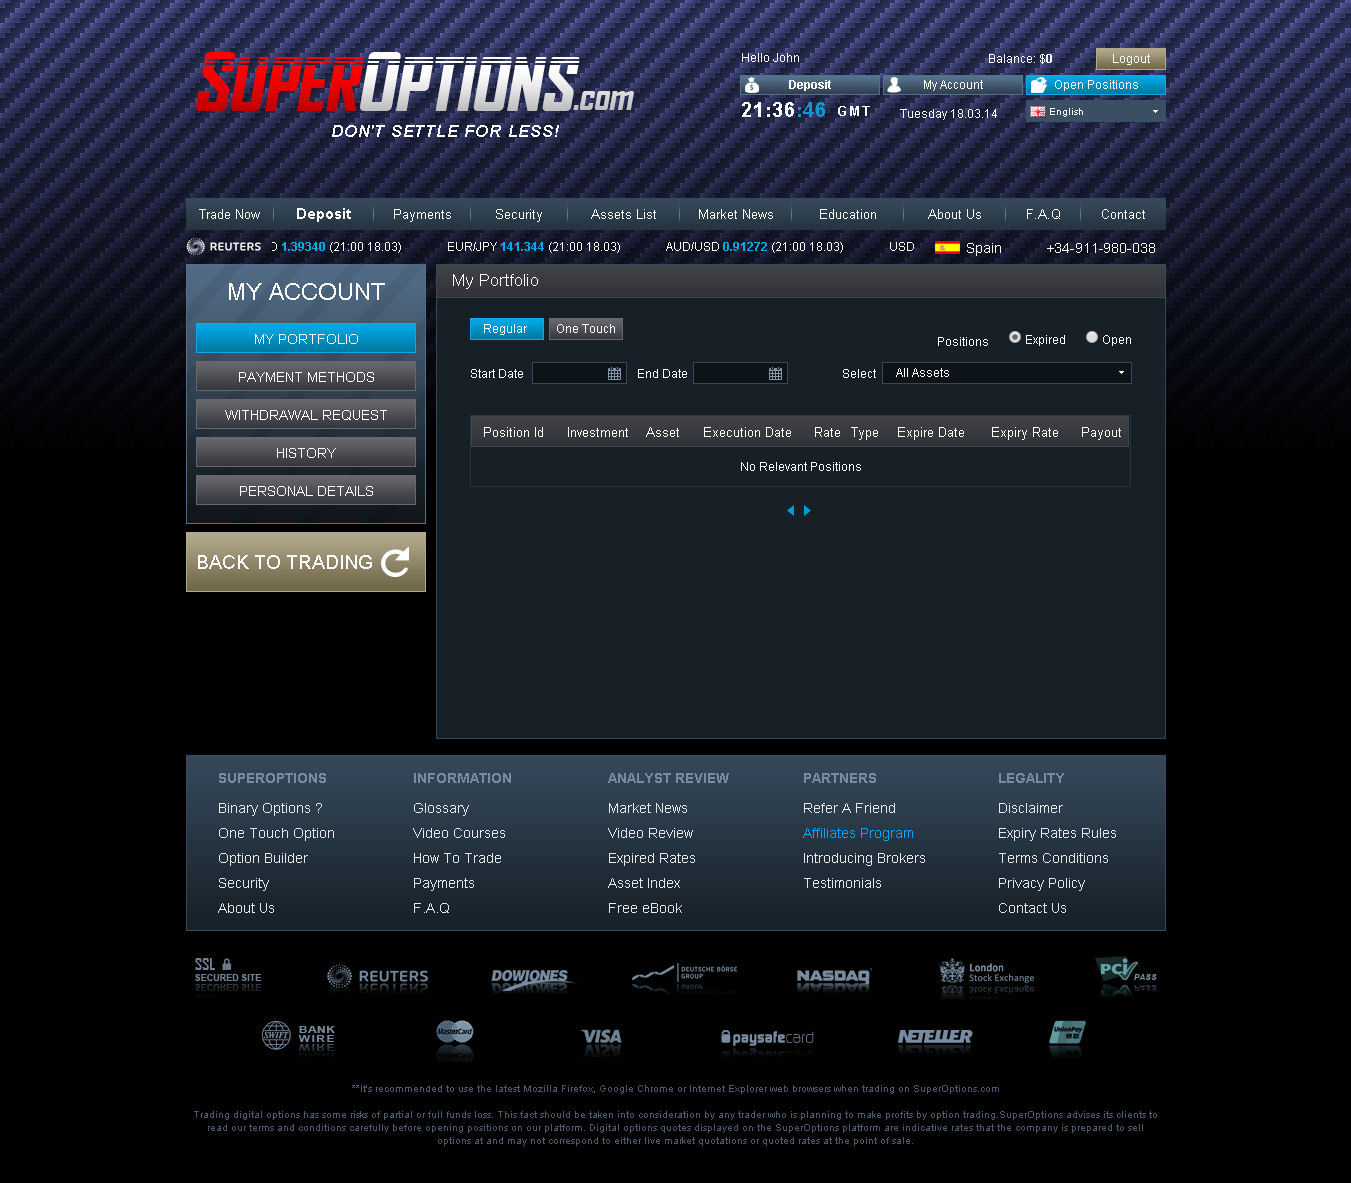 Reliable binary options brokers